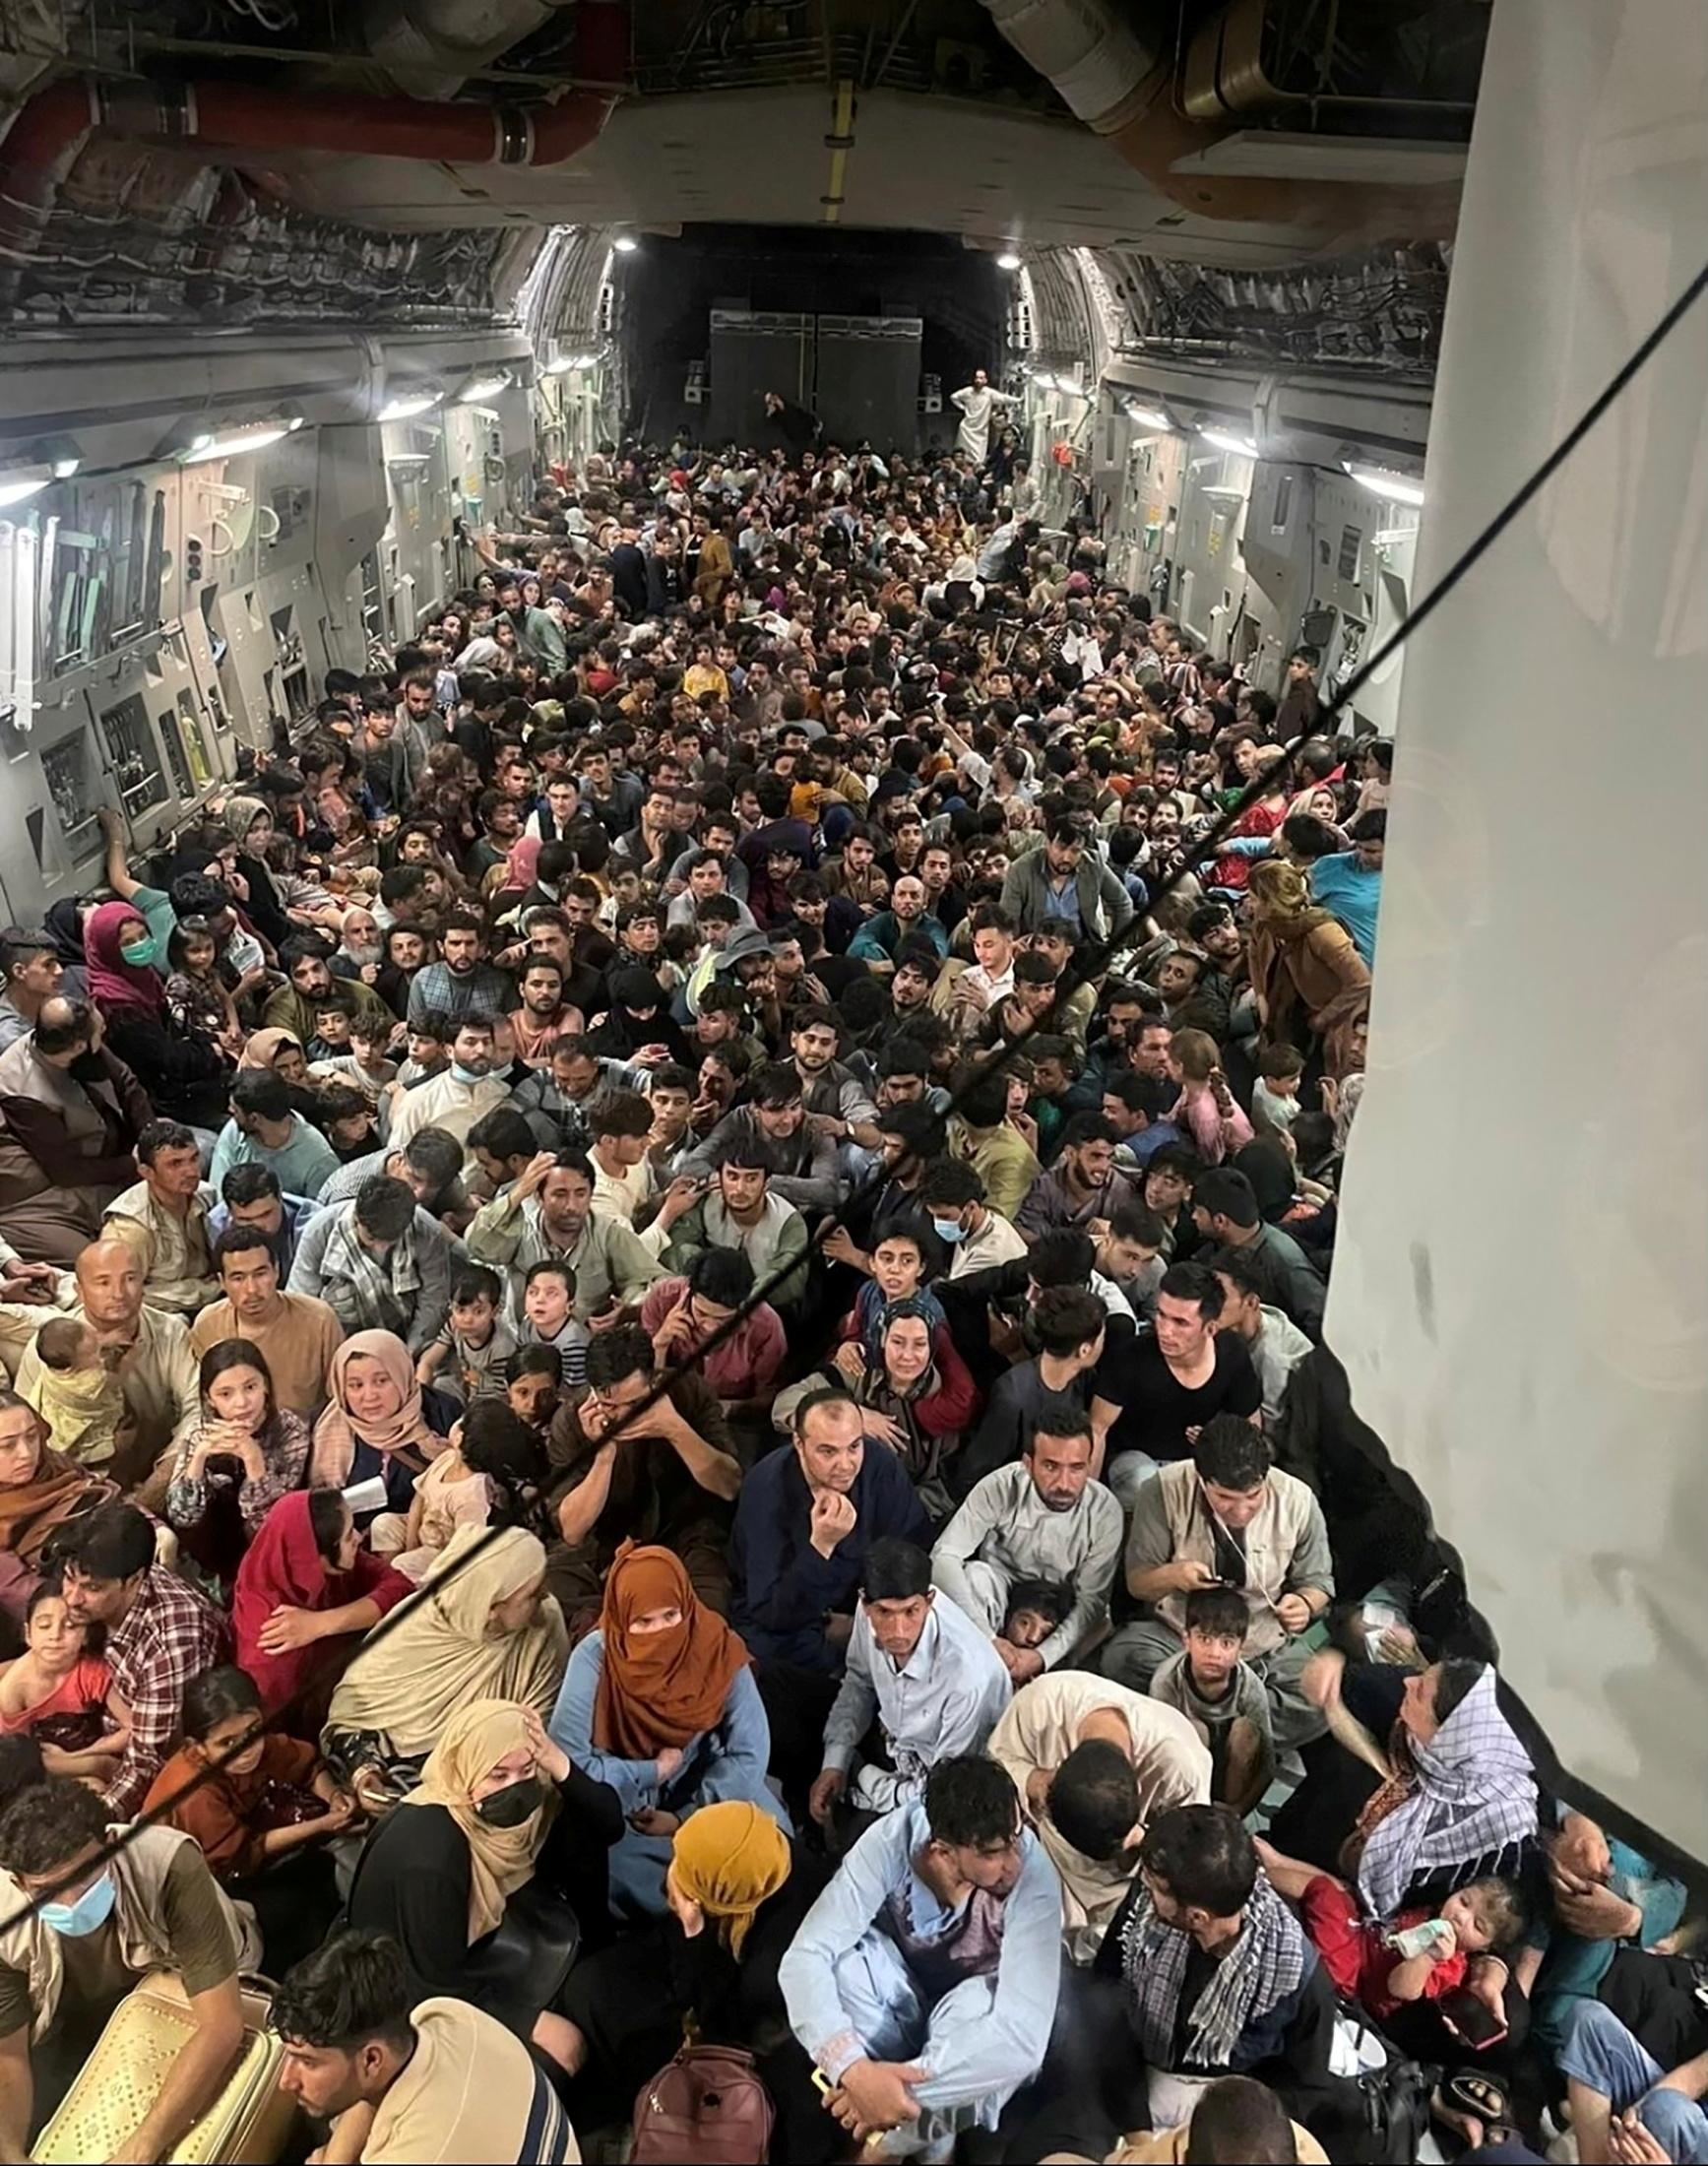 Evacuees crowd the interior of a U.S. Air Force C-17 Globemaster III transport aircraft, carrying some 640 Afghans to Qatar from Kabul, Afghanistan on August 15, 2021.